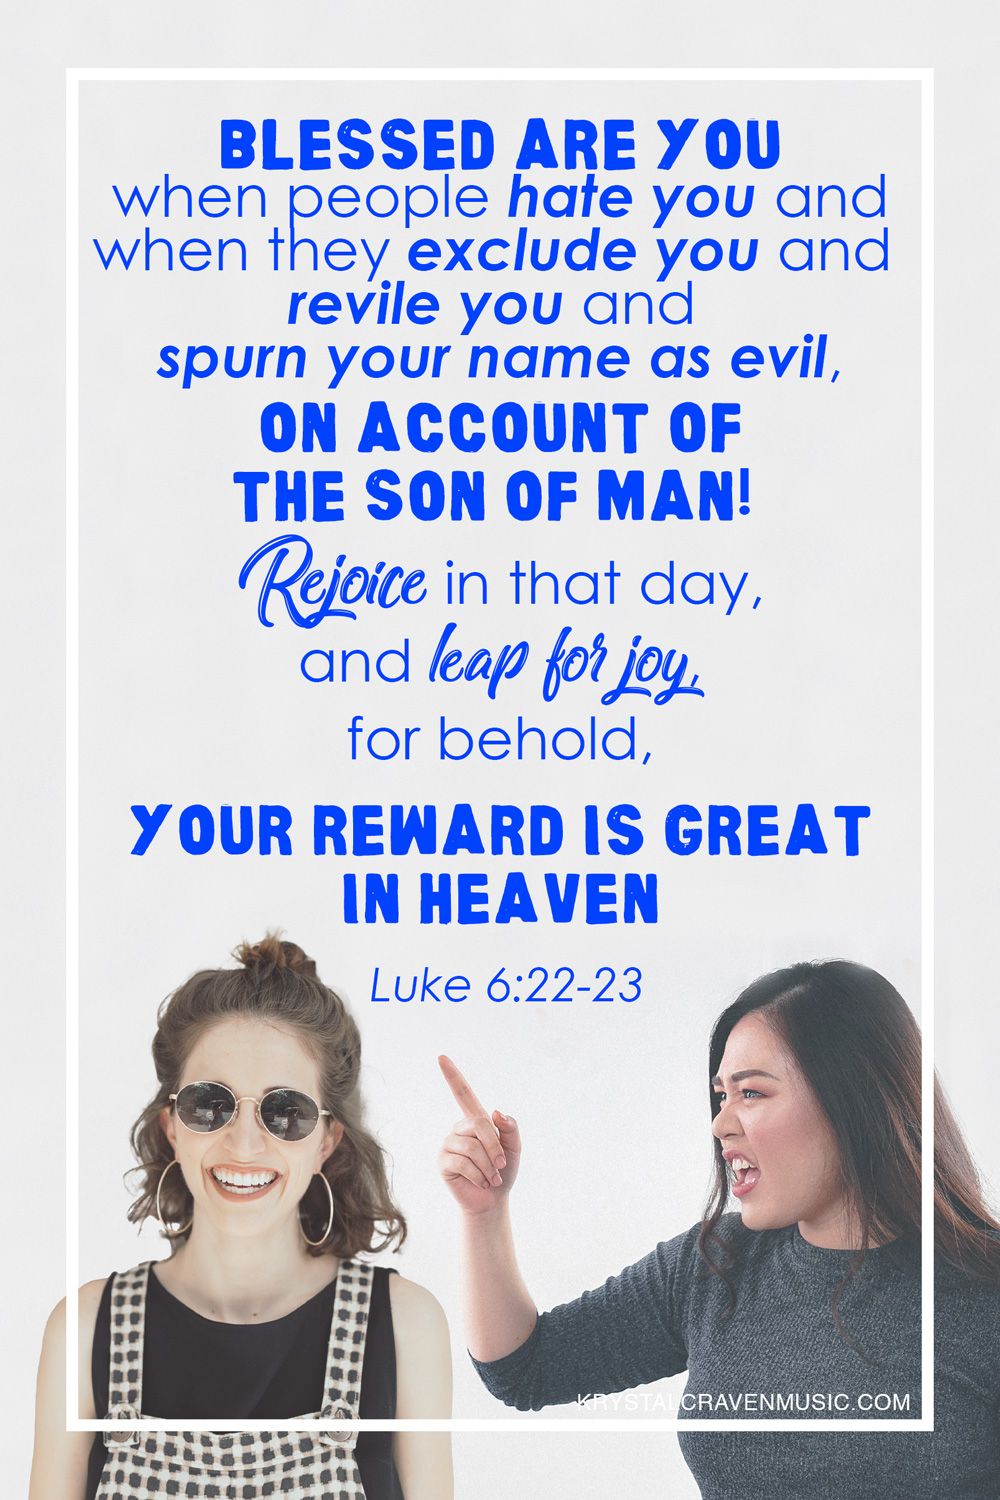 Devotional title text of "Blessed are the Hated" overlaying the image of a woman on the right yelling while pointing a finger at a woman on the left who is front facing and smiling.